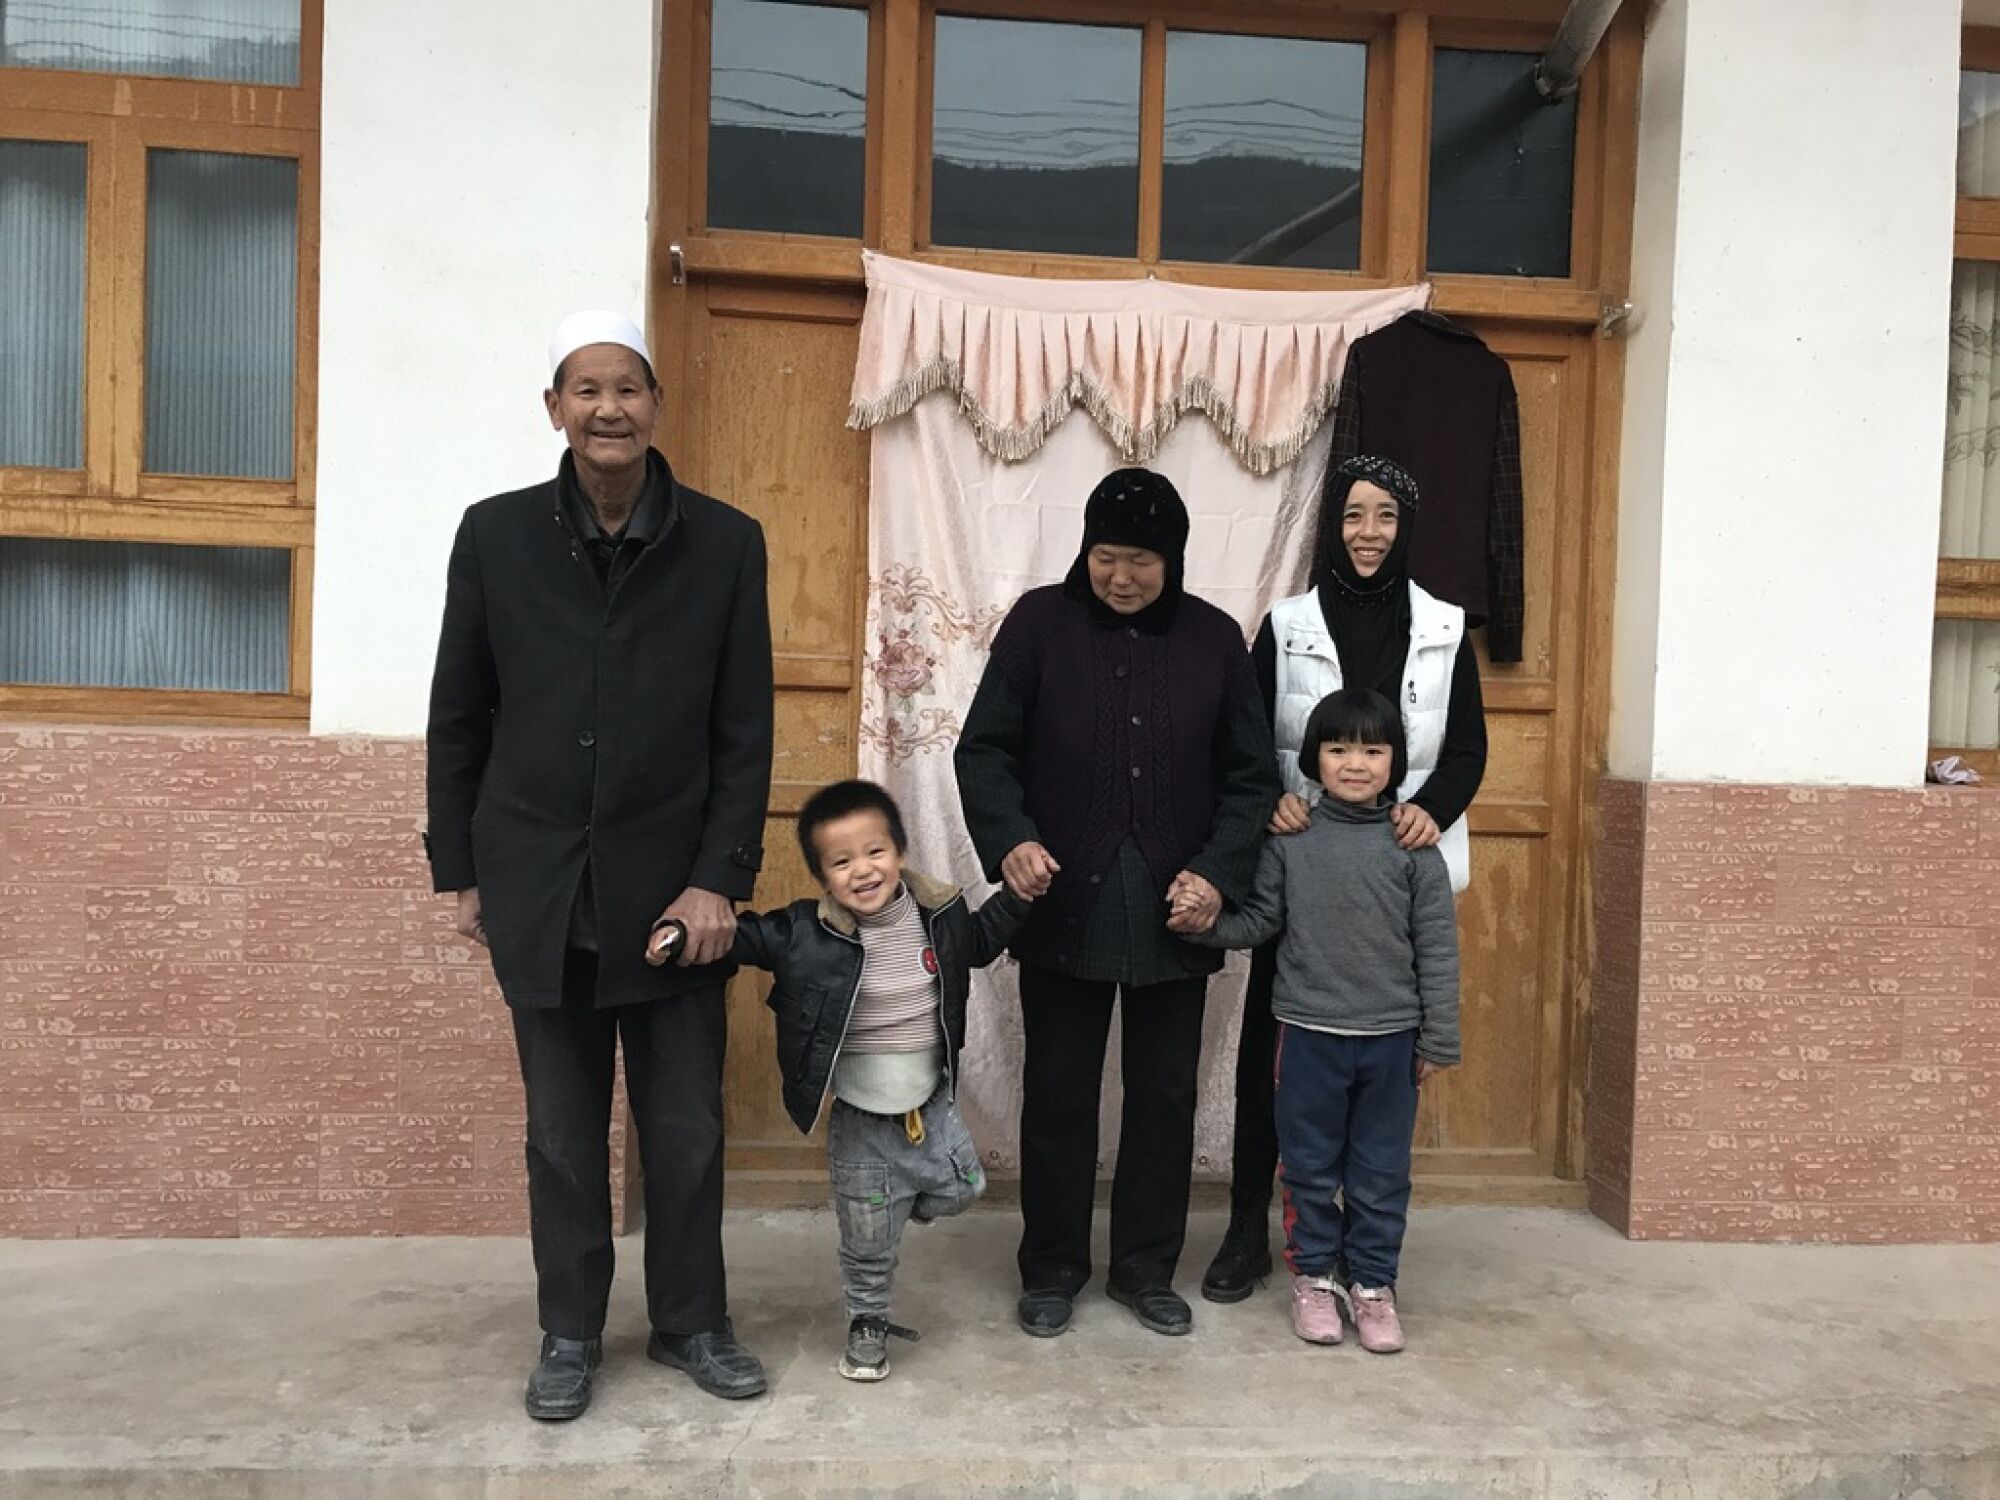 Mawumaile and Maruru, a Dongxiang couple in Bulengou village, pose with their daughter-in-law and two grandchildren.